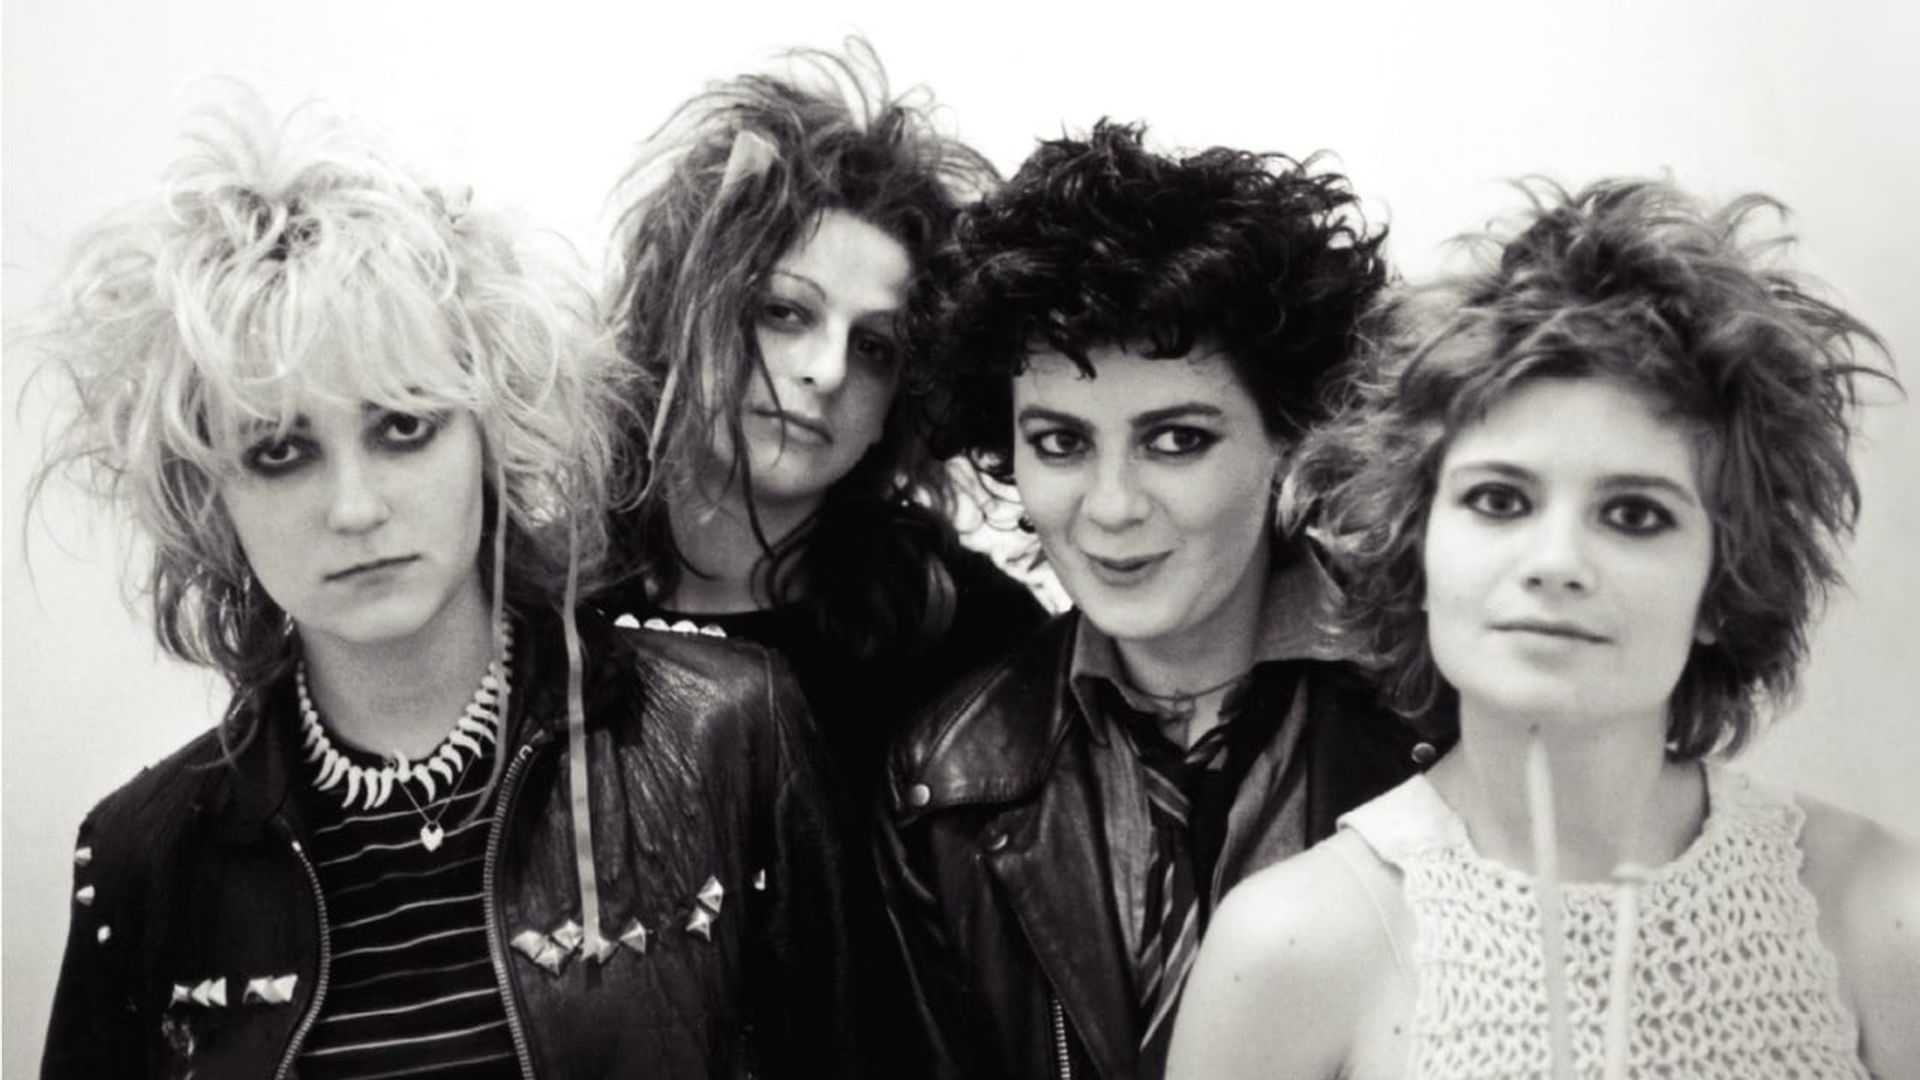 Here to Be Heard: The Story of the Slits background